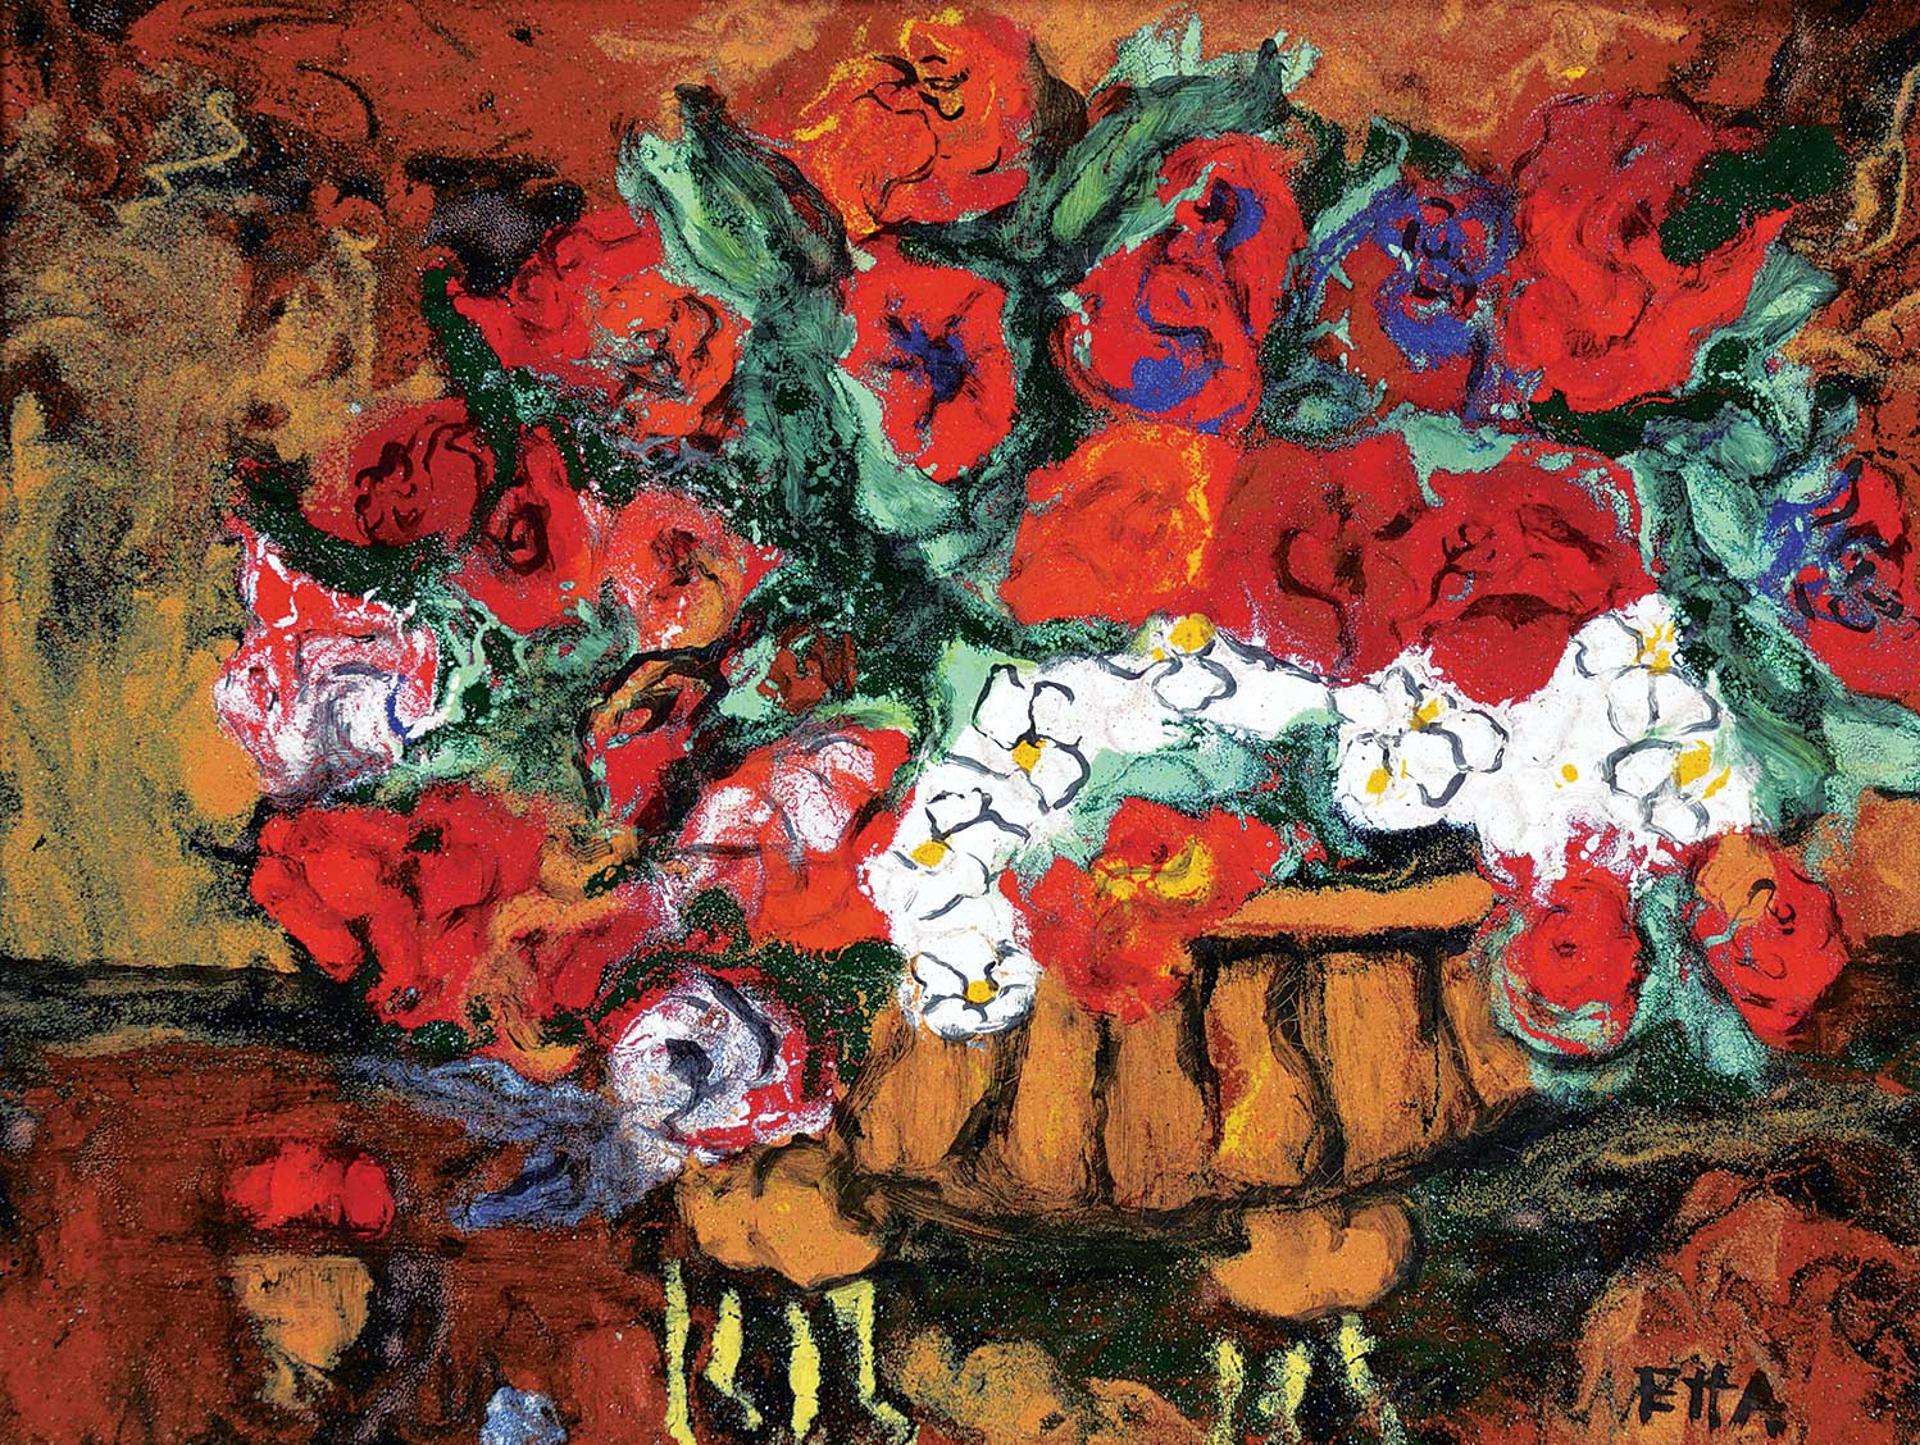 Etta - Untitled - Colourful Flowers in Vase